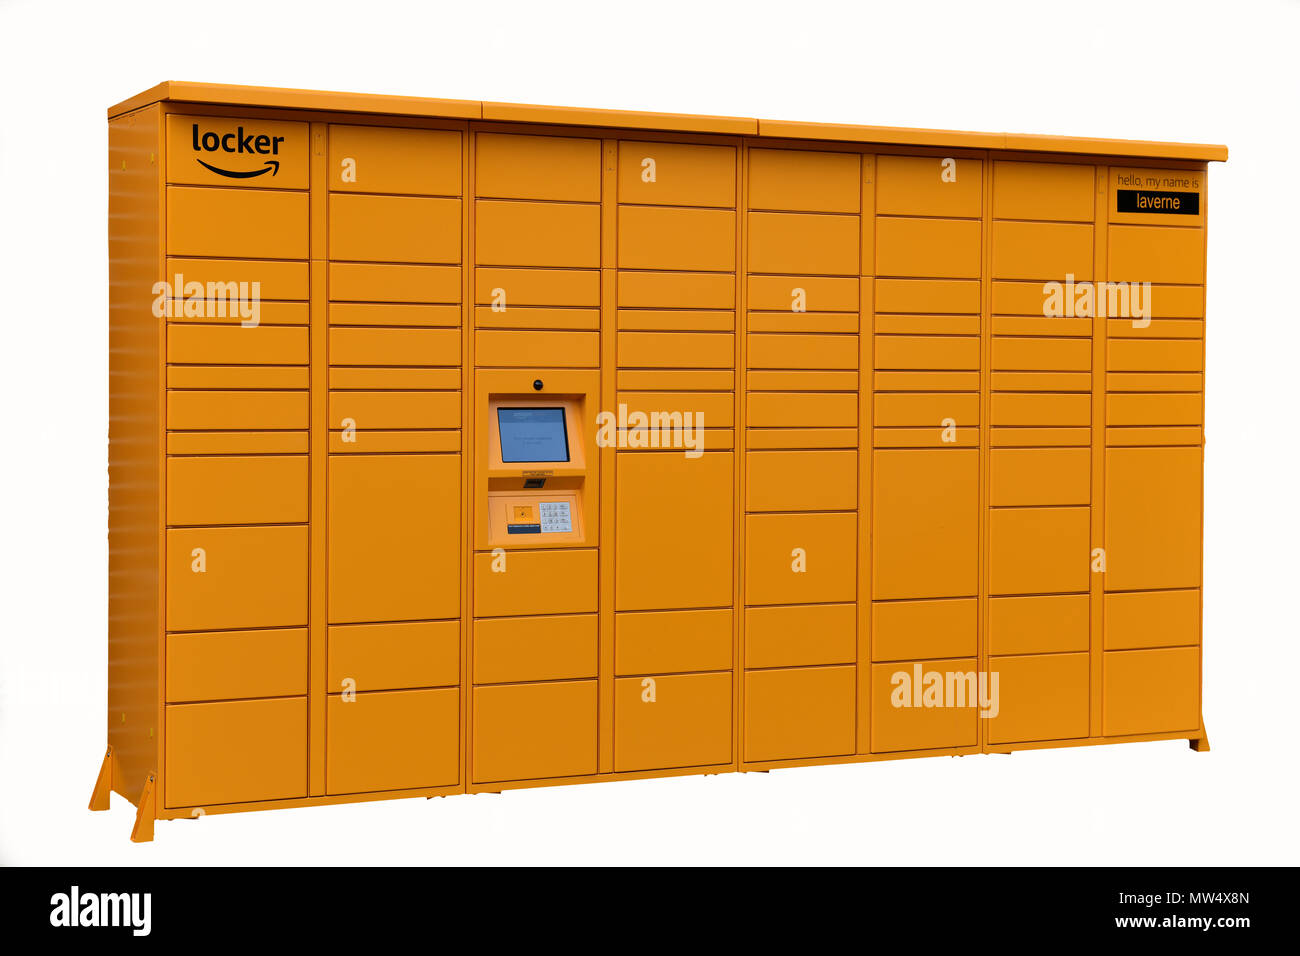 Amazon Locker a secure delivery system that Amazon uses at public places for pick up and returns of packages Stock Photo